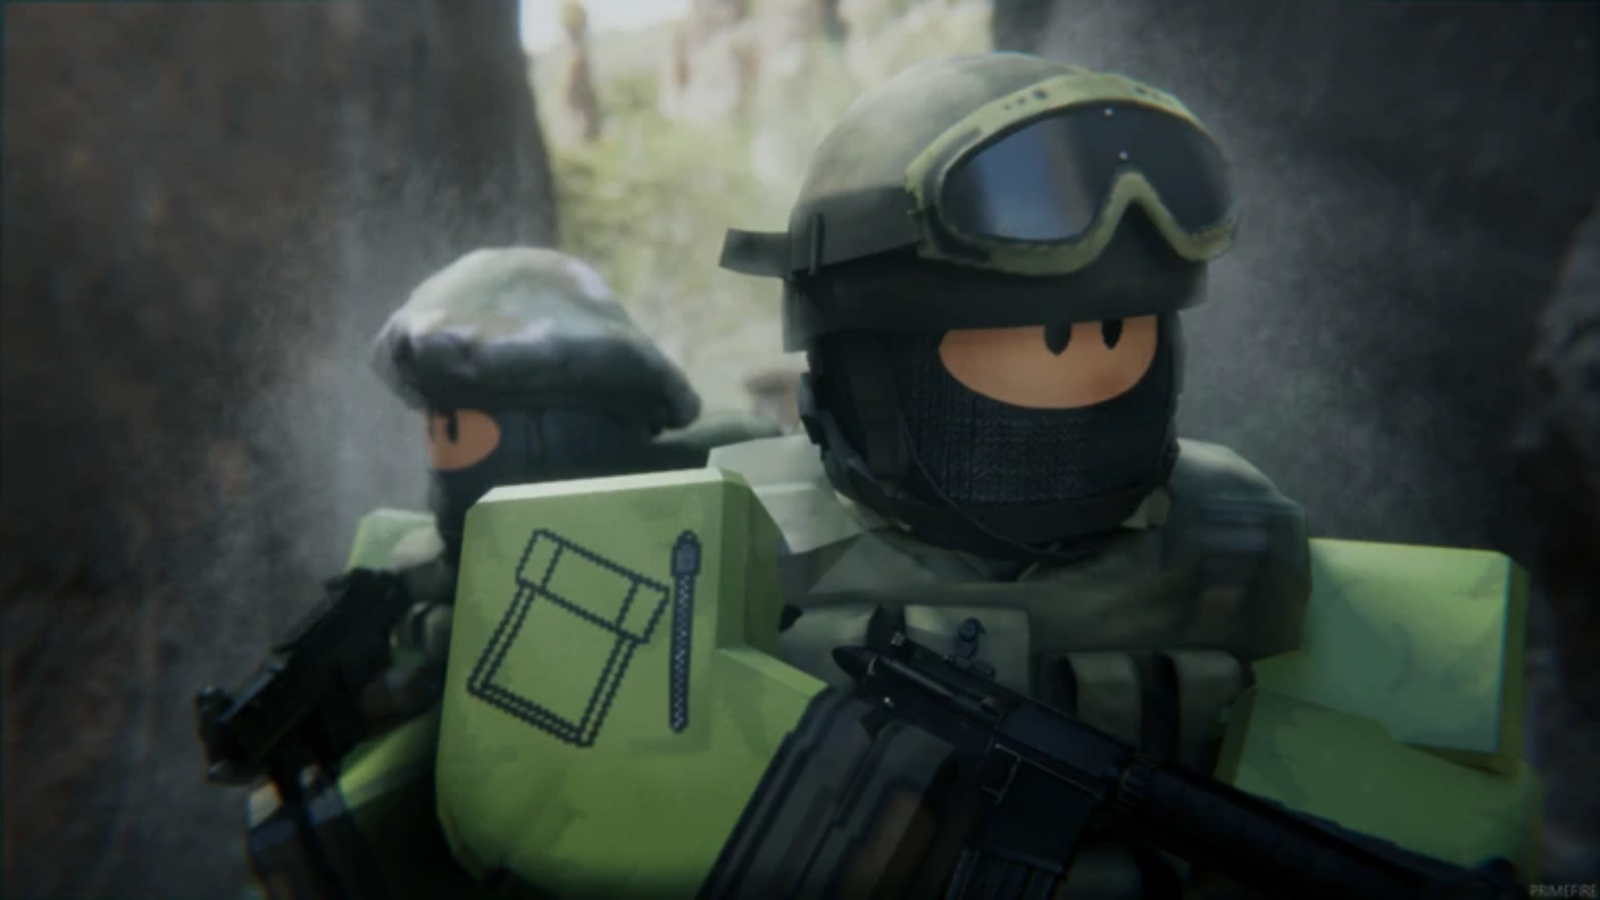 Fans of the Counter-Strike series would likely appreciate this Roblox experience.